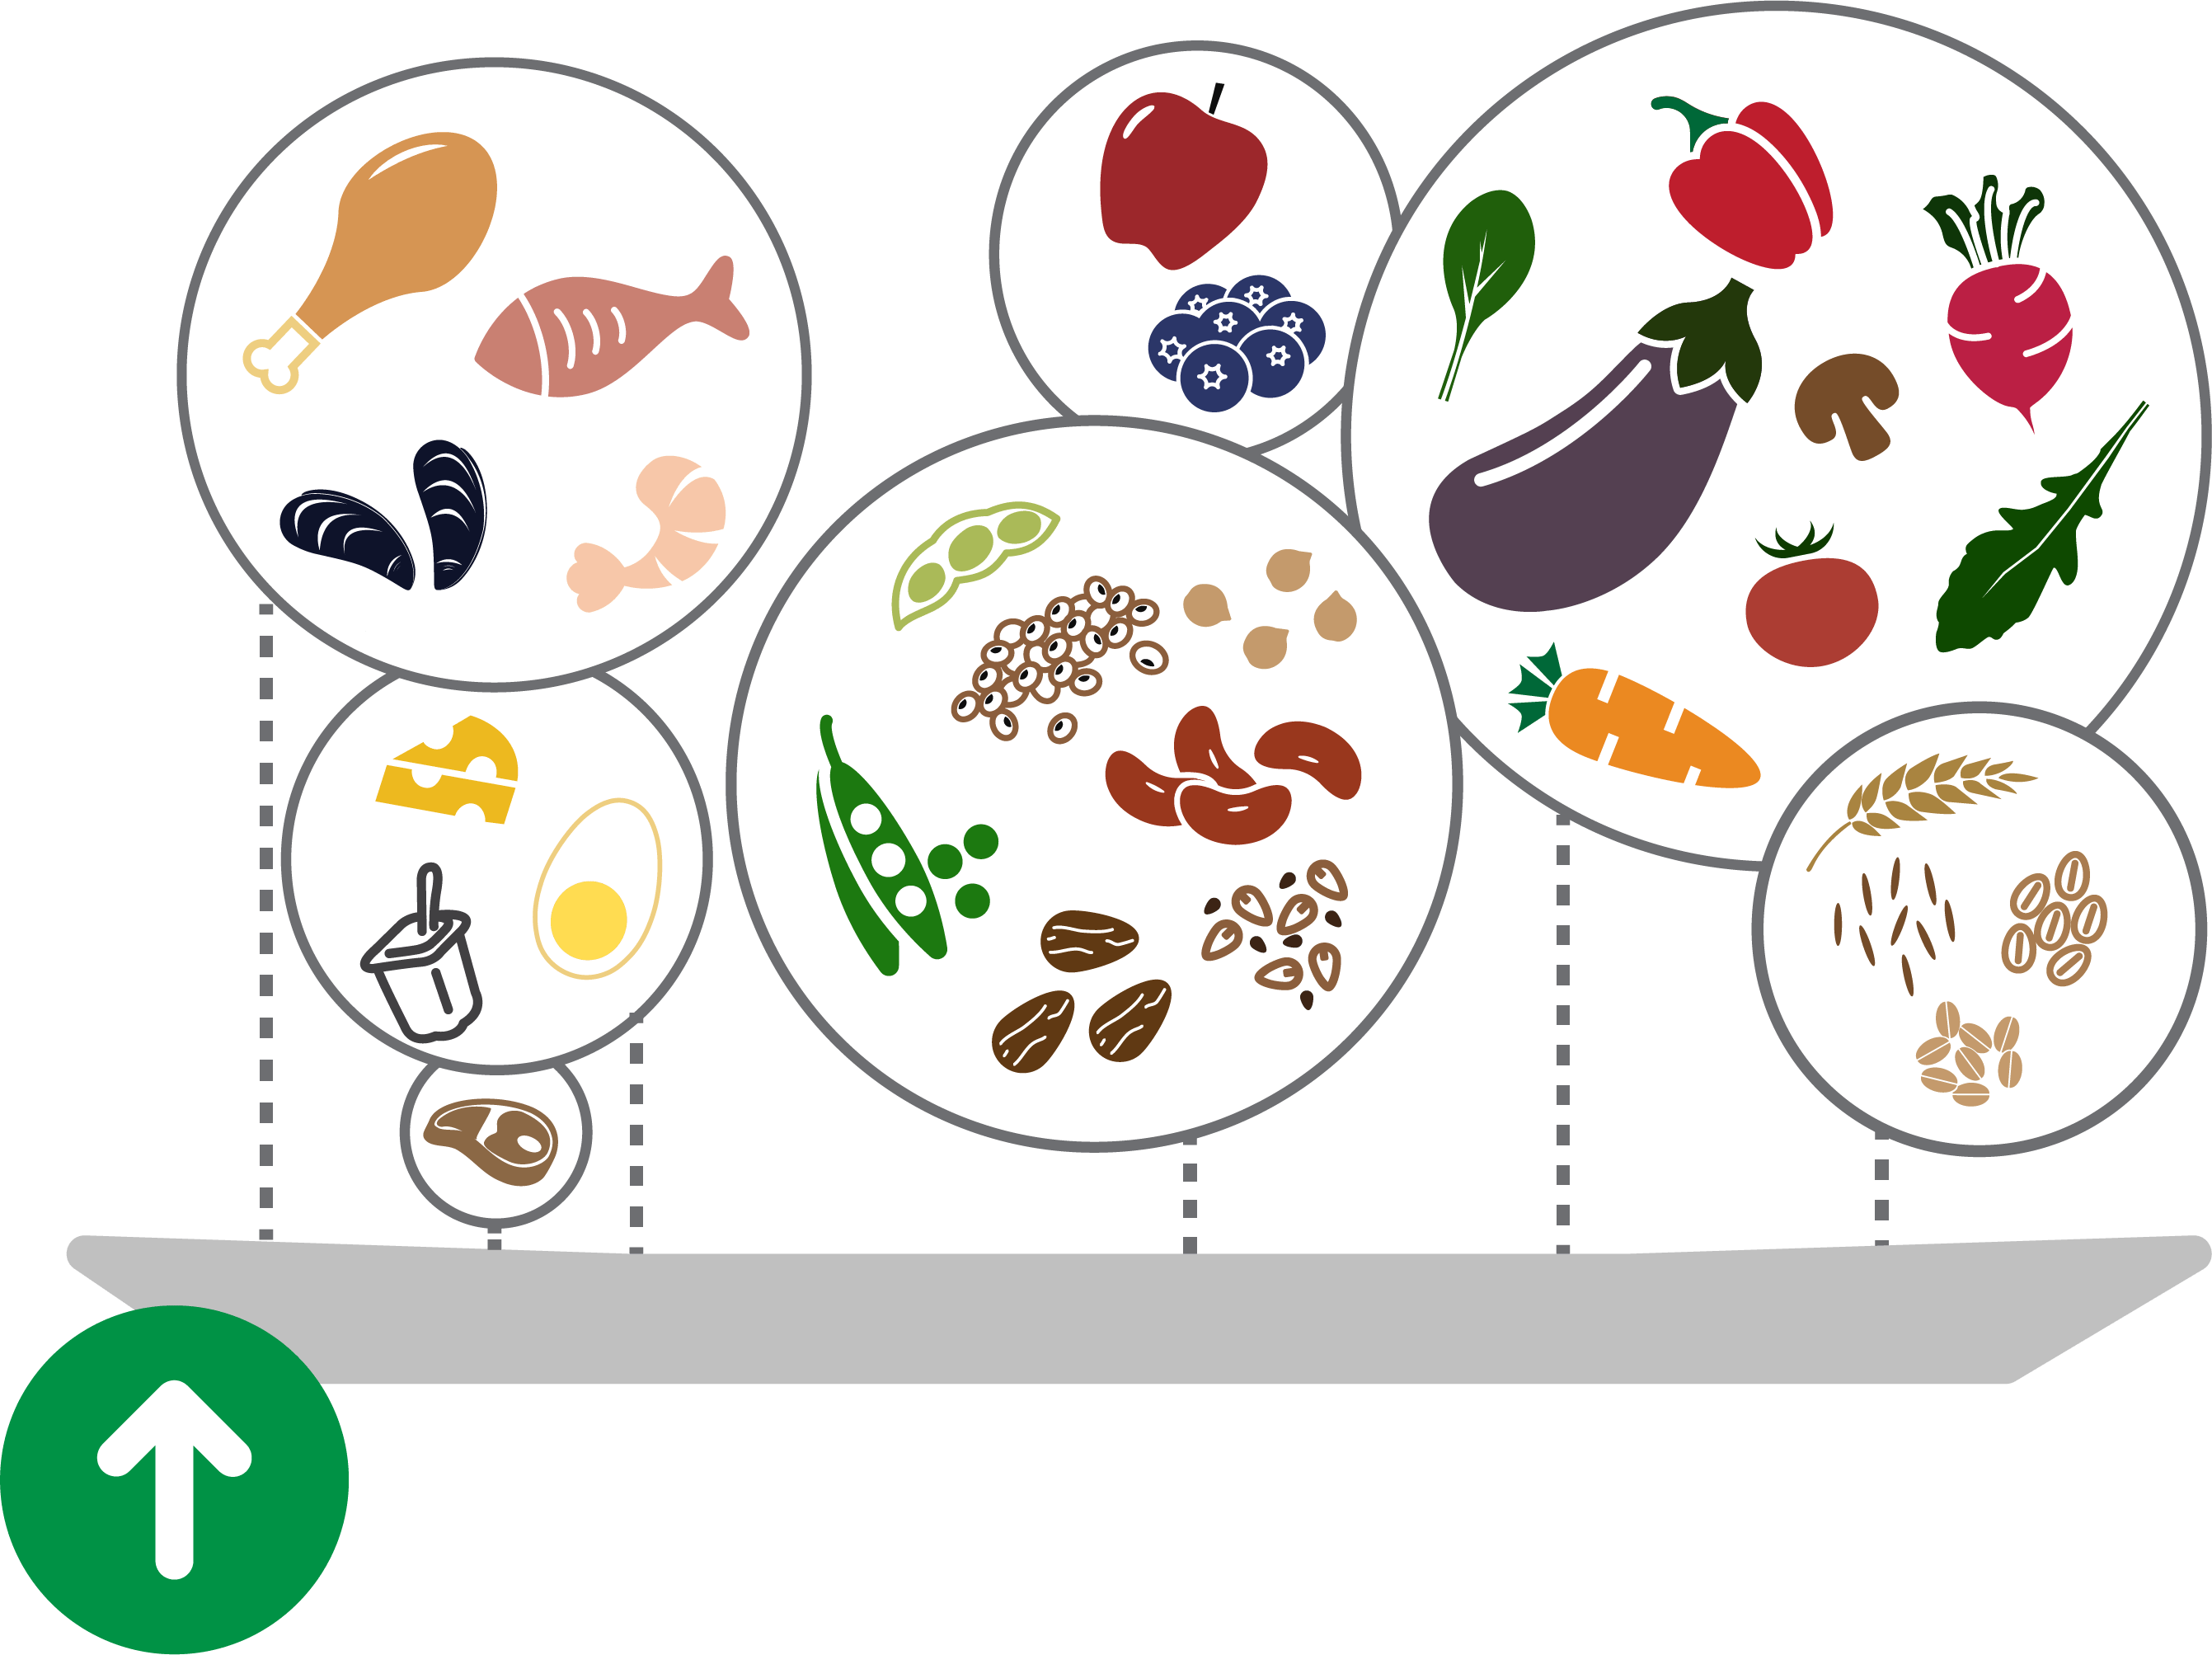 Protein | The Nutrition Source | Harvard . Chan School of Public Health